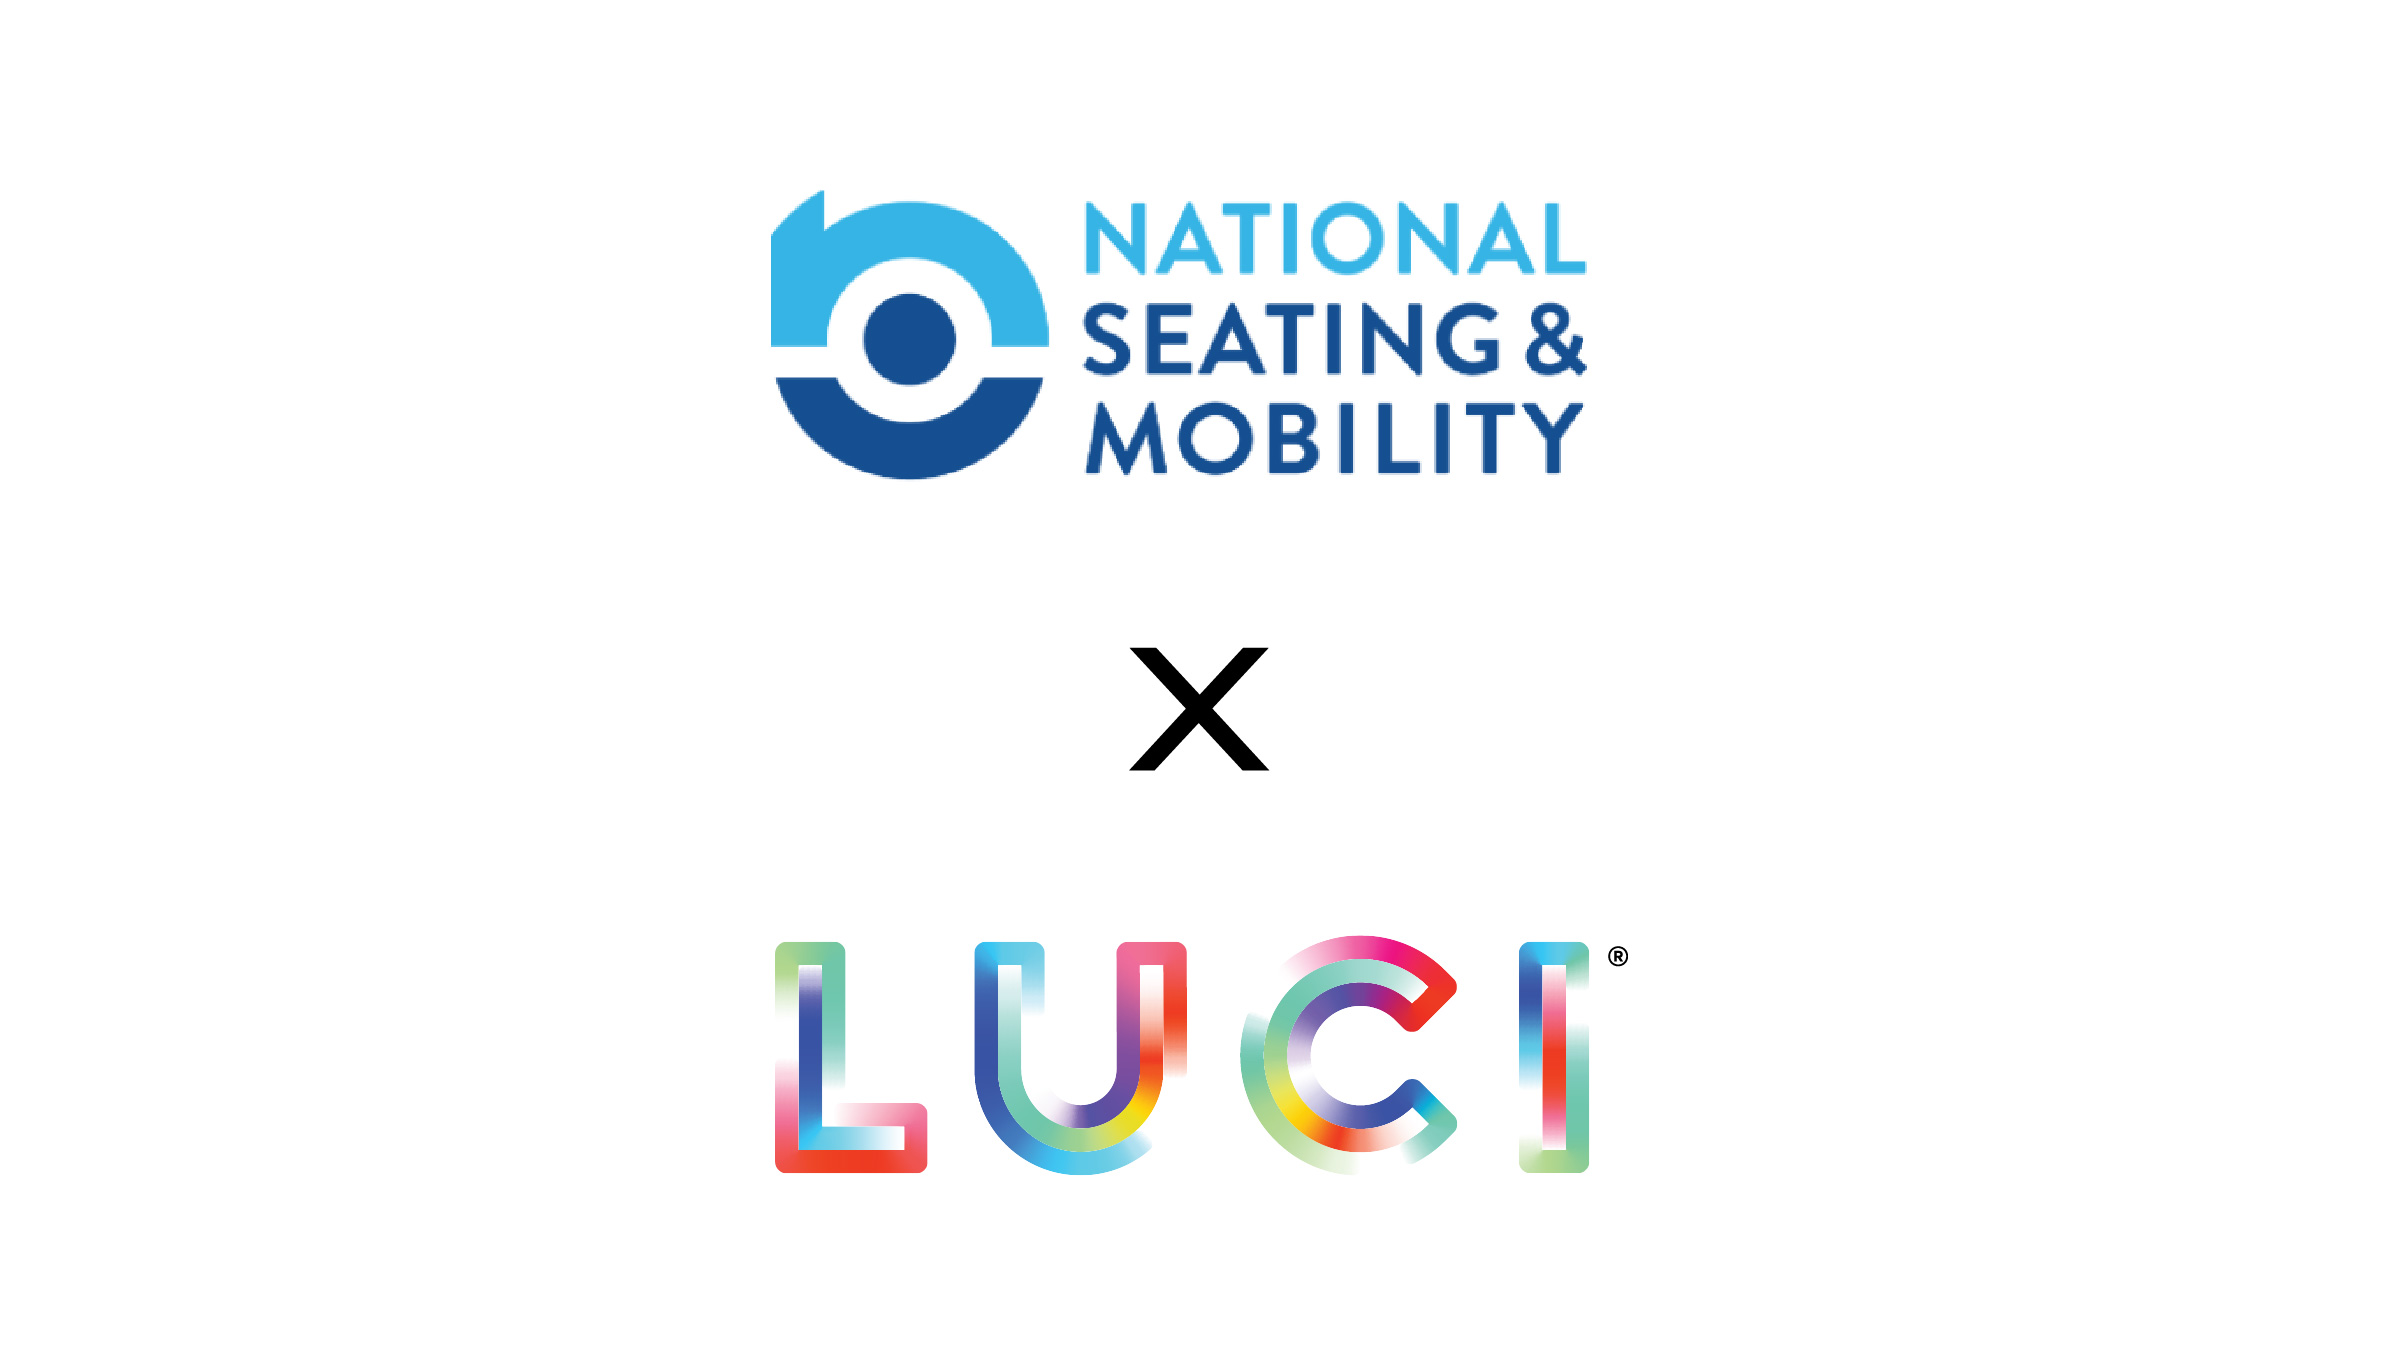 National Seating & Mobility Partners with LUCI to Expand Access to Smart Technology Platform for Power Wheelchairs Nationwide